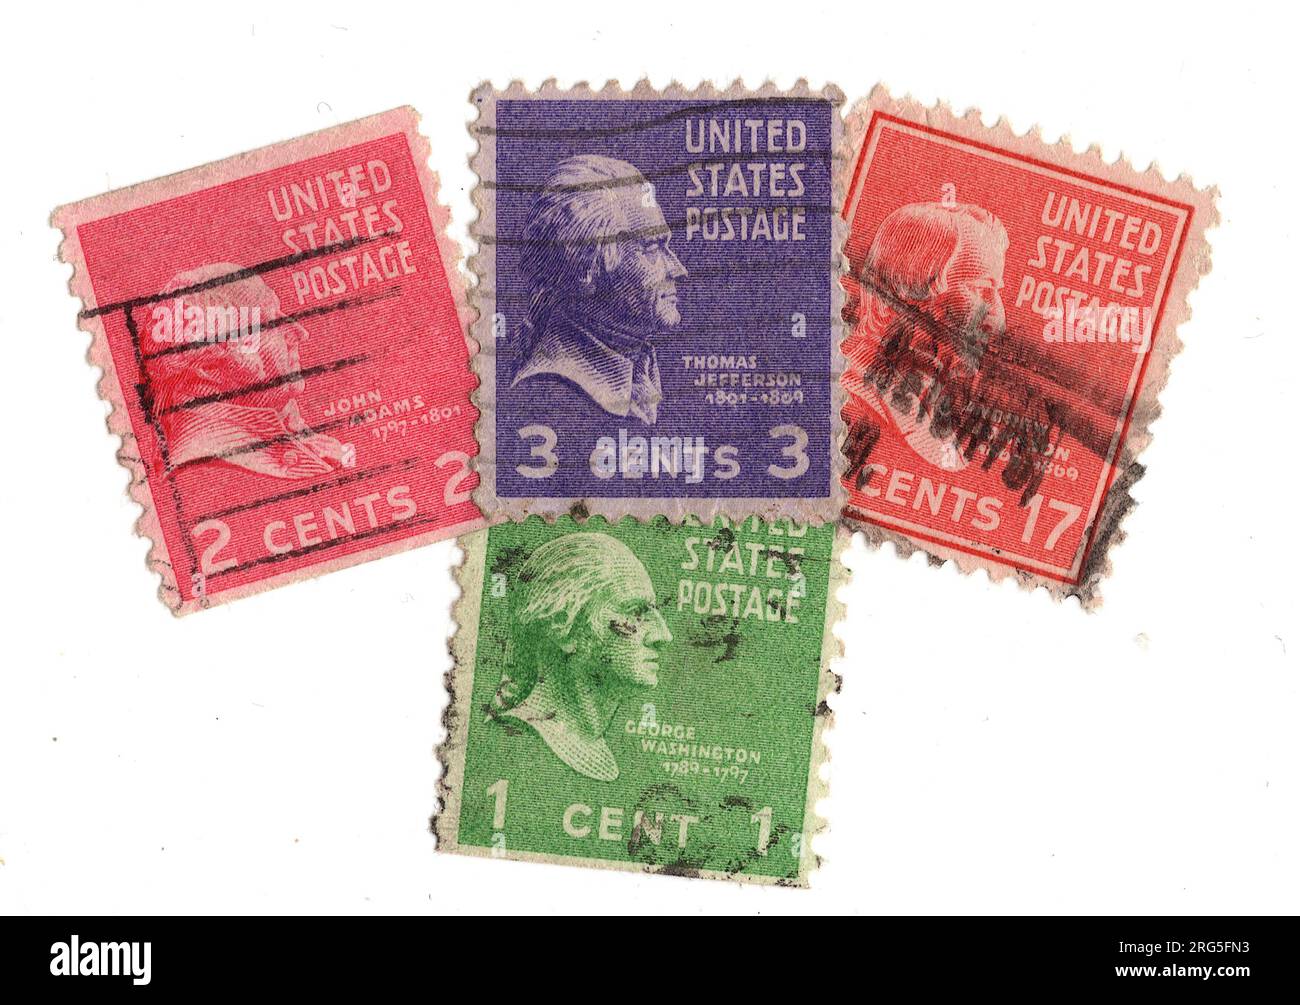 A montage of vintage postage stamps from the USA featuring Thomas Jefferson on a white background. Stock Photo